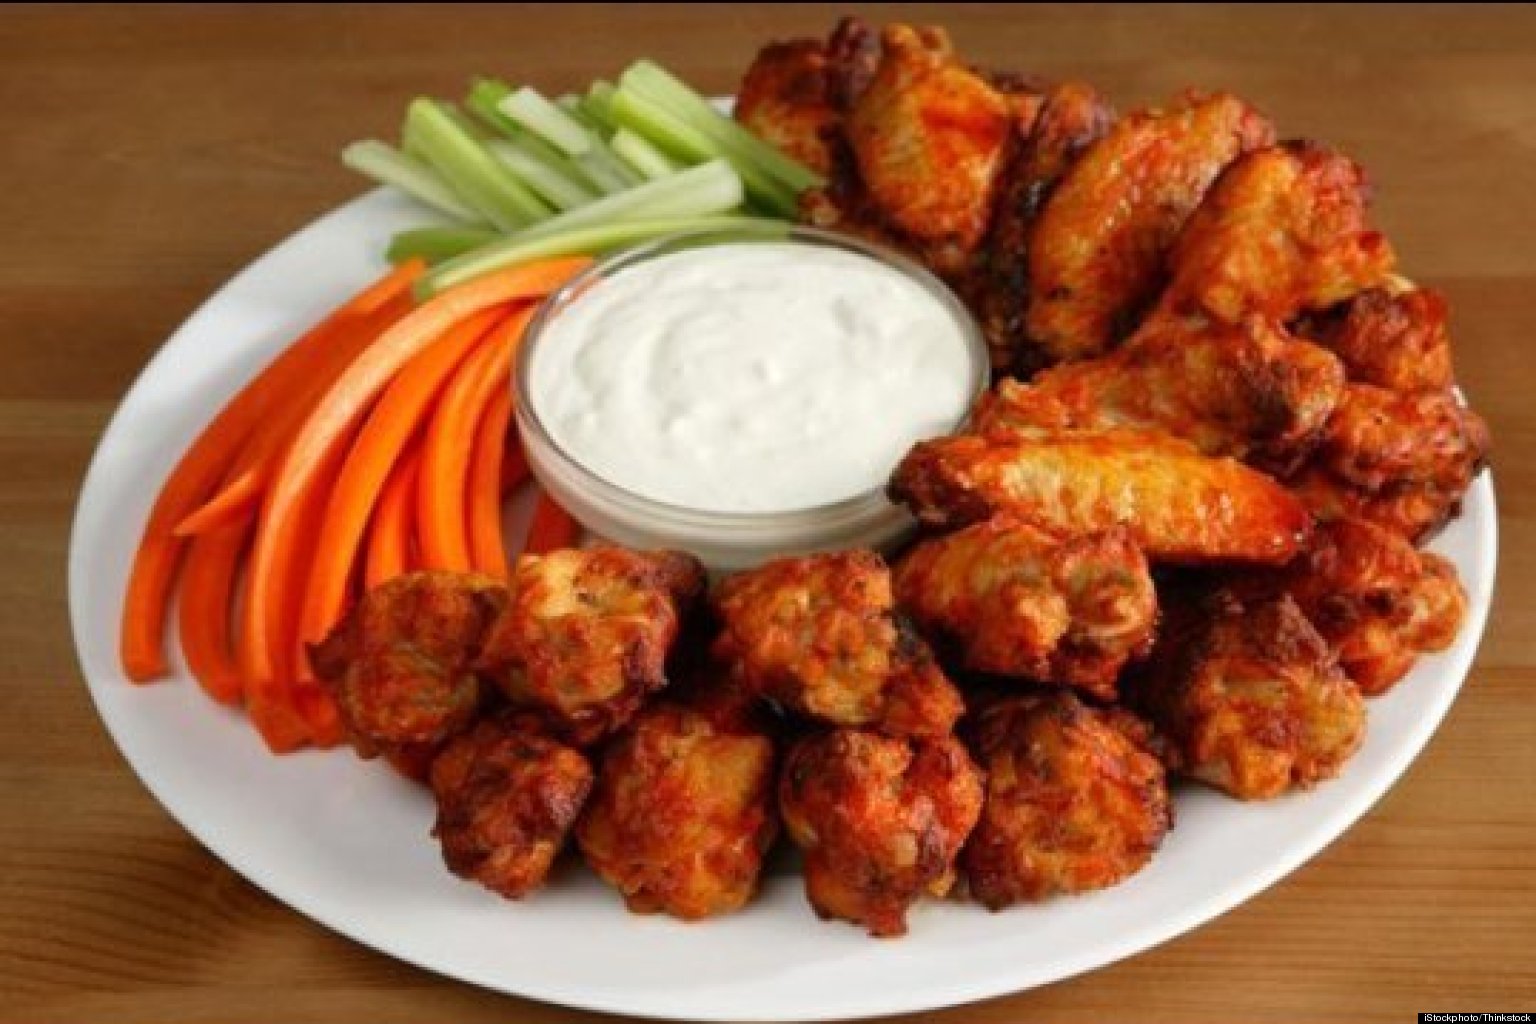 How To Make The Ultimate Buffalo Wing | The Daily Meal1536 x 1024